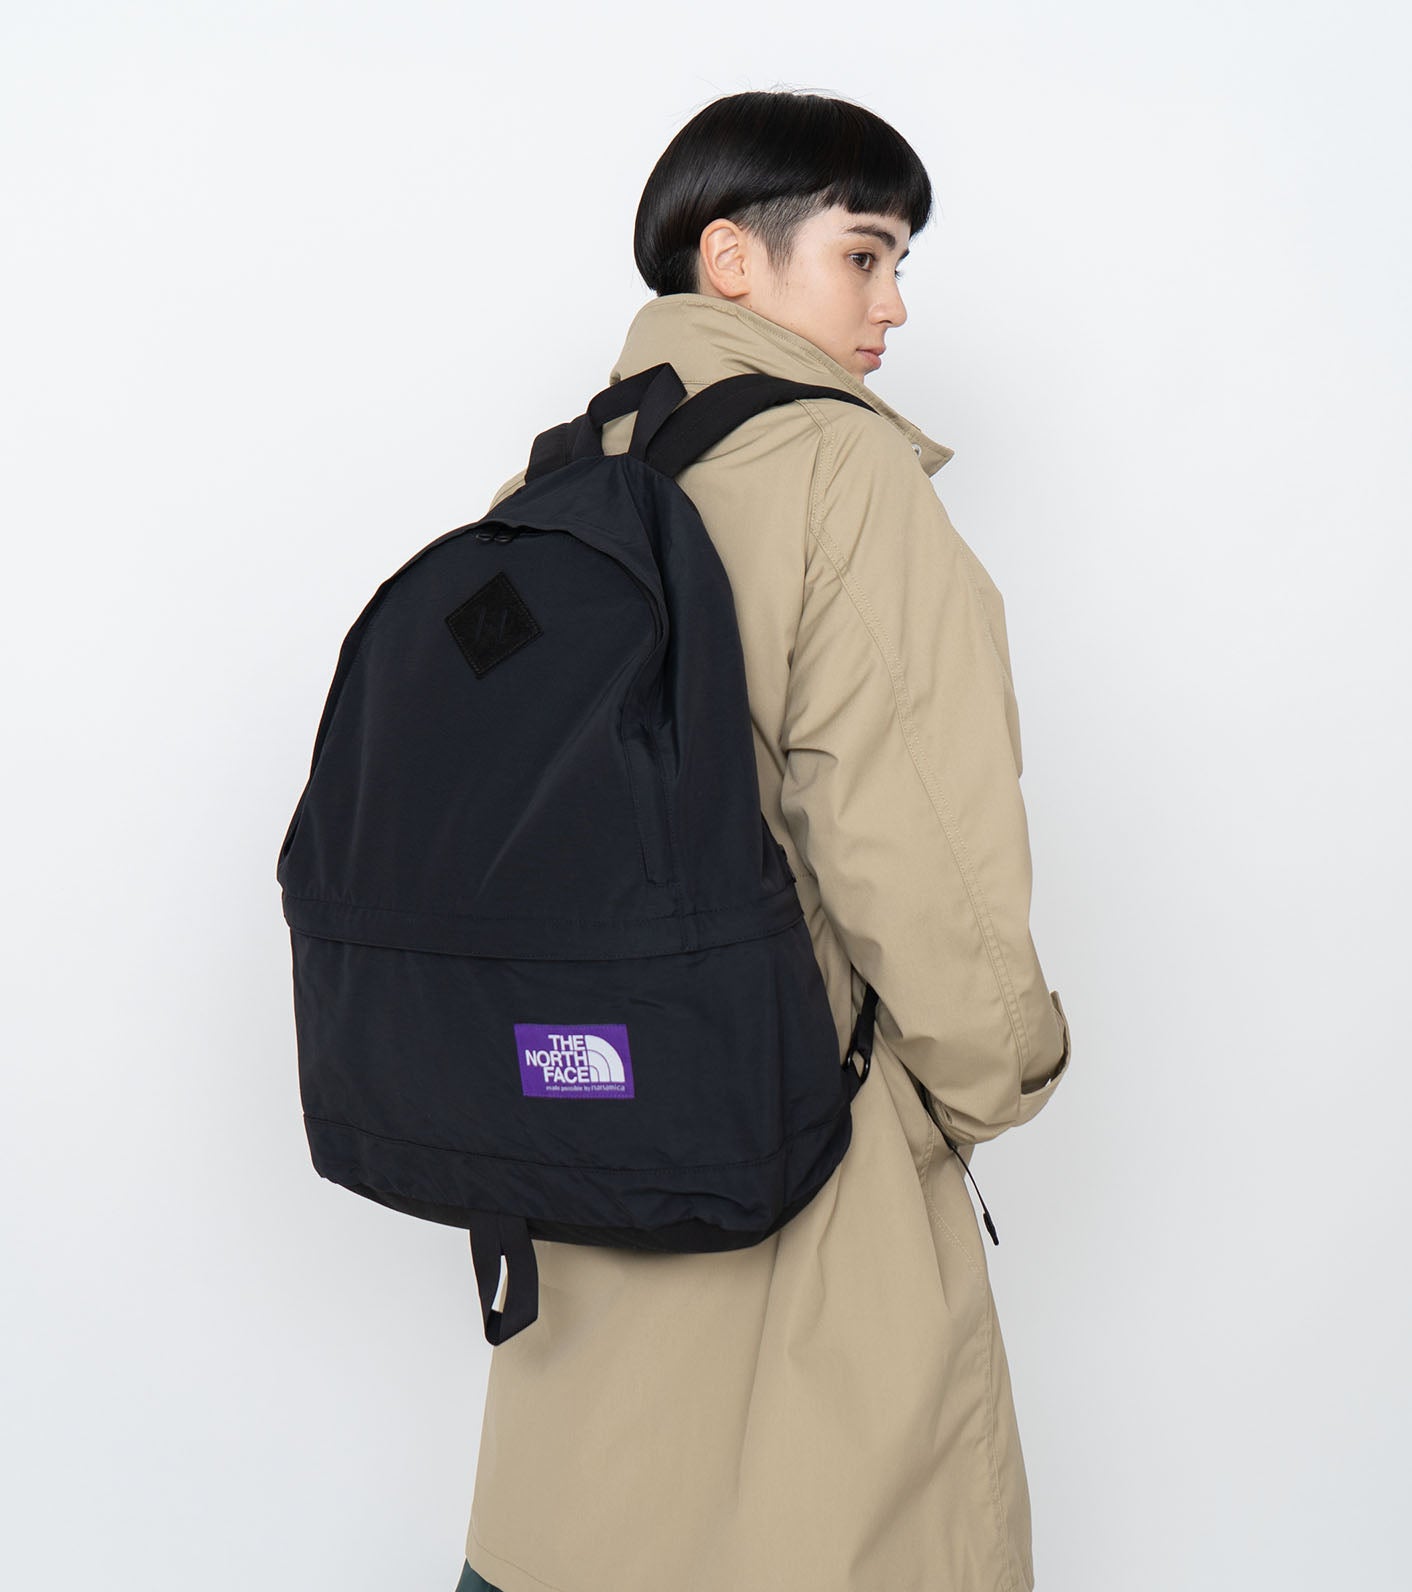 THE NORTH FACE PURPLE LABEL for RHC | nate-hospital.com